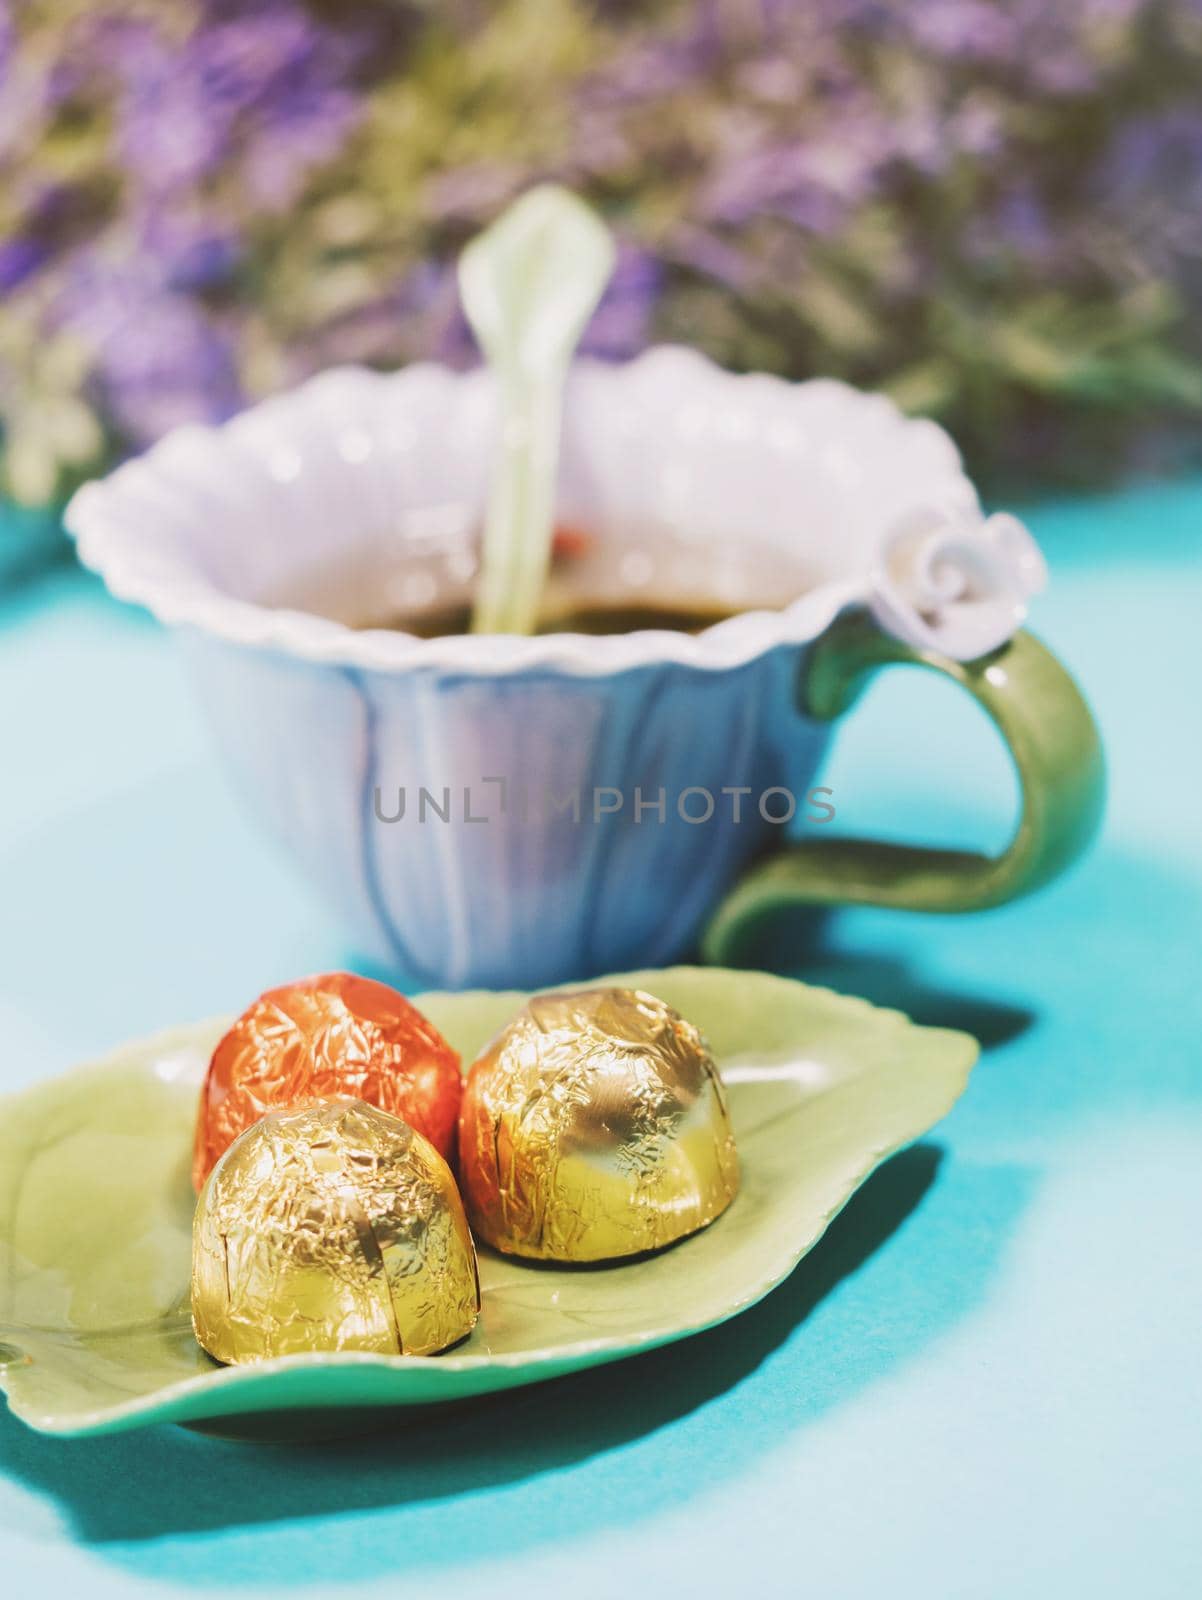 Handmade beautiful flower cup of fragrant tea violet porcelain and candies by kristina_kokhanova